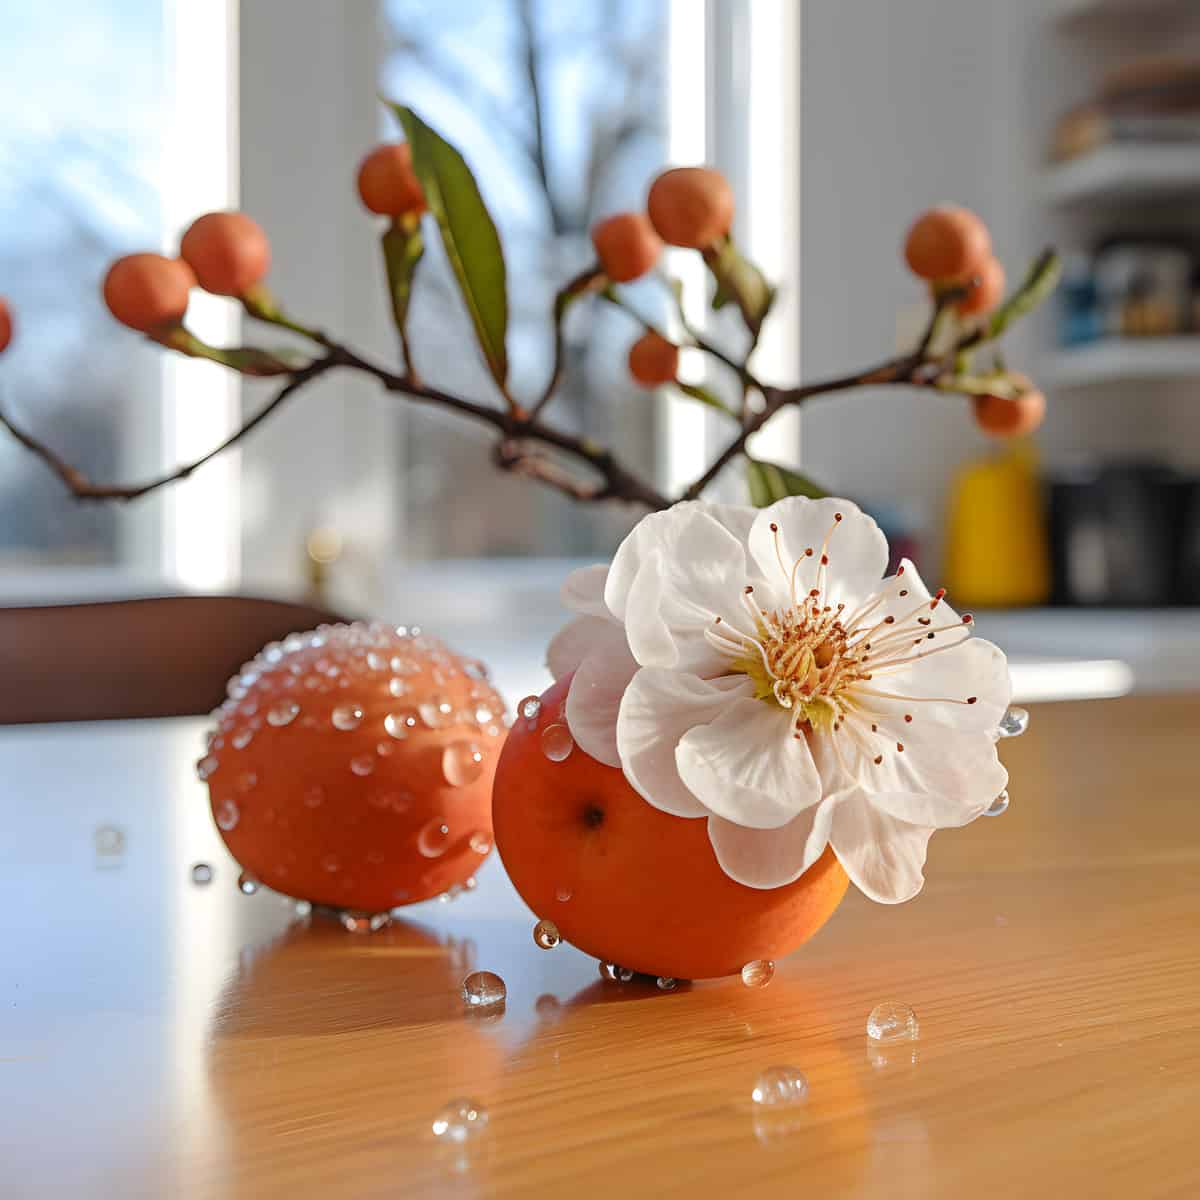 Snowy Mespilus on a kitchen counter